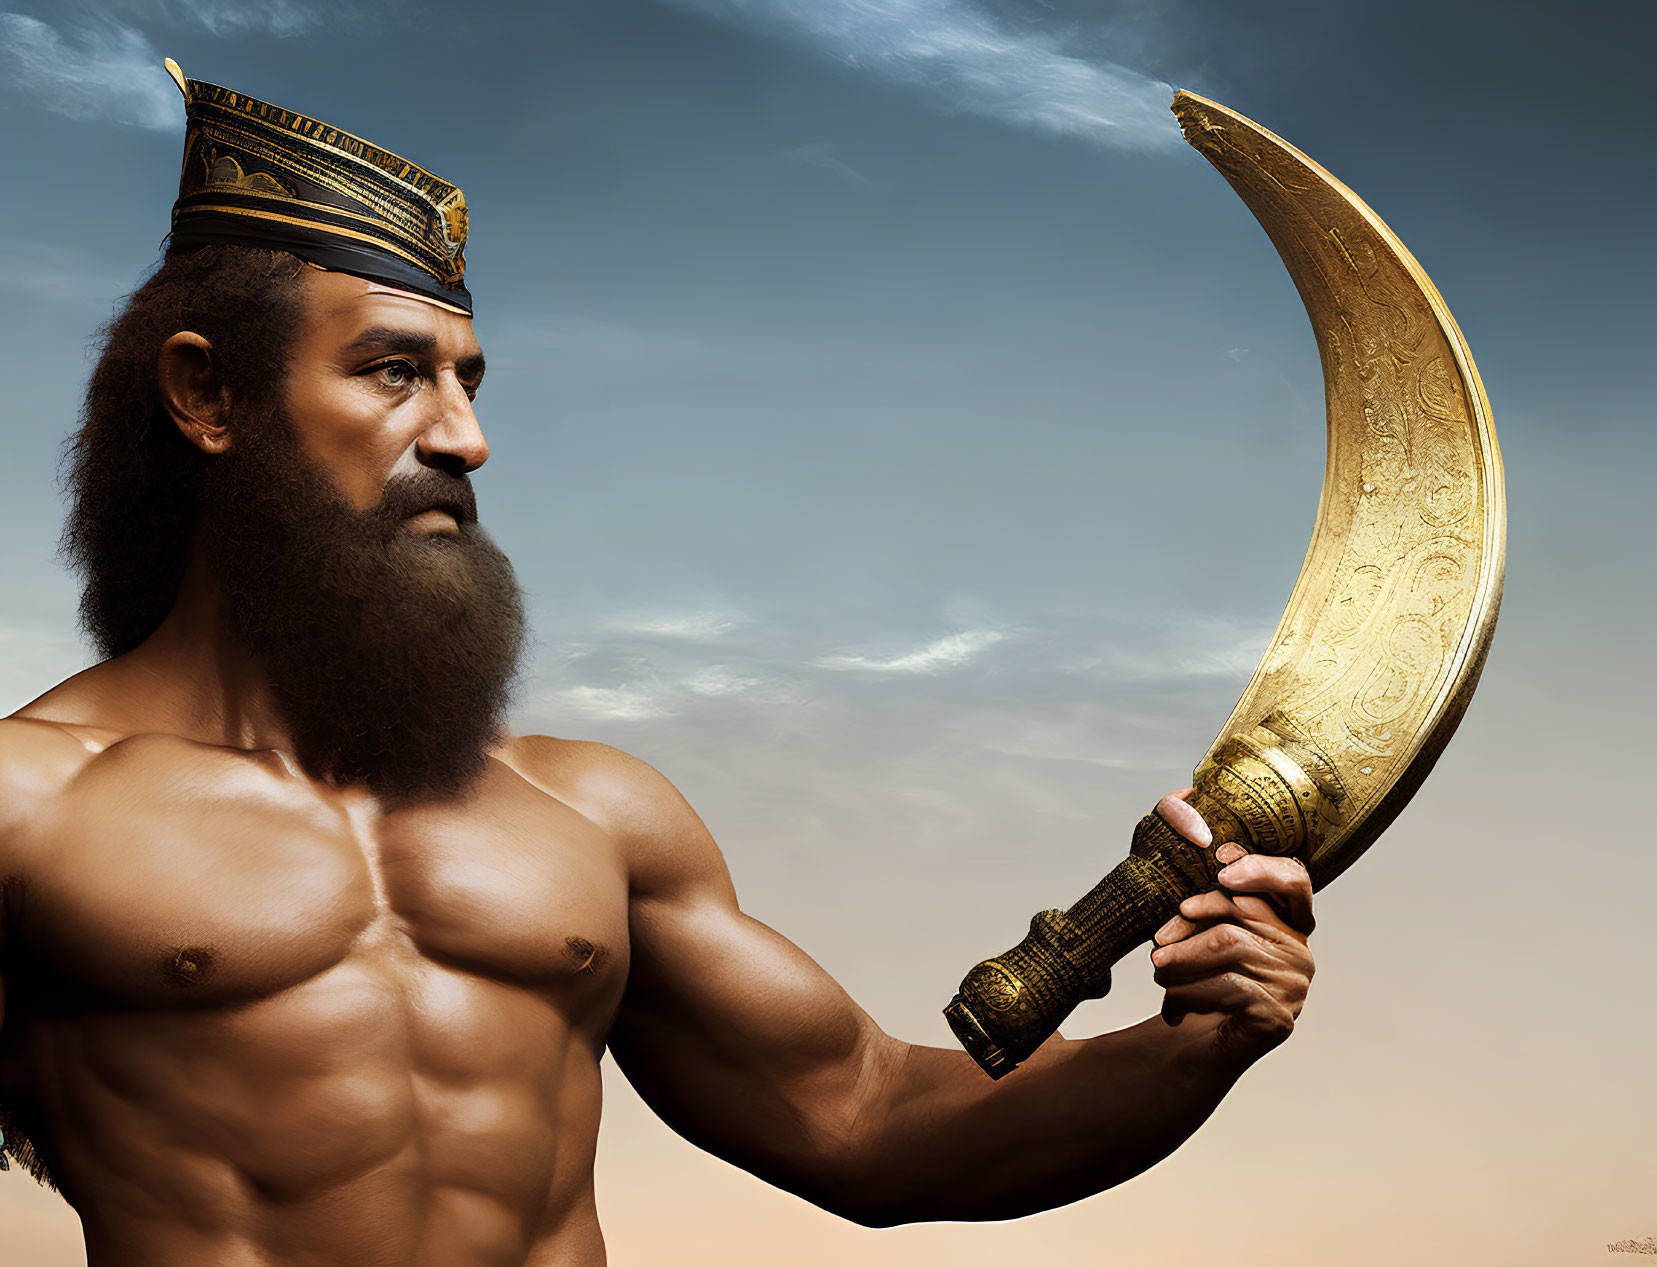 Muscular man with beard holding golden sickle at dusk